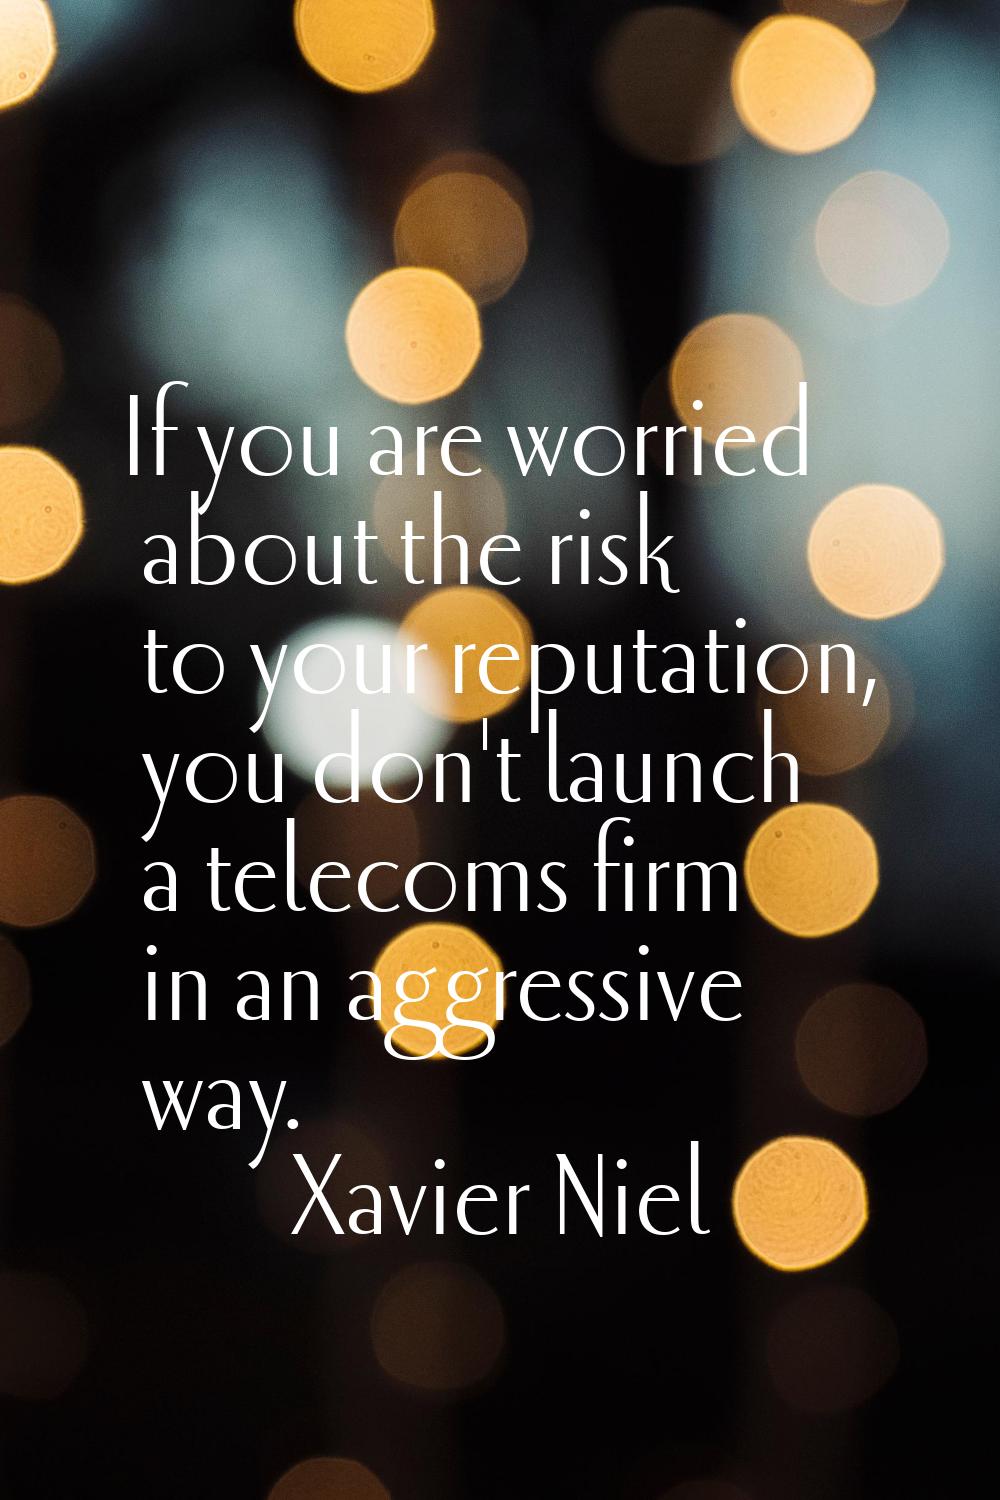 If you are worried about the risk to your reputation, you don't launch a telecoms firm in an aggres